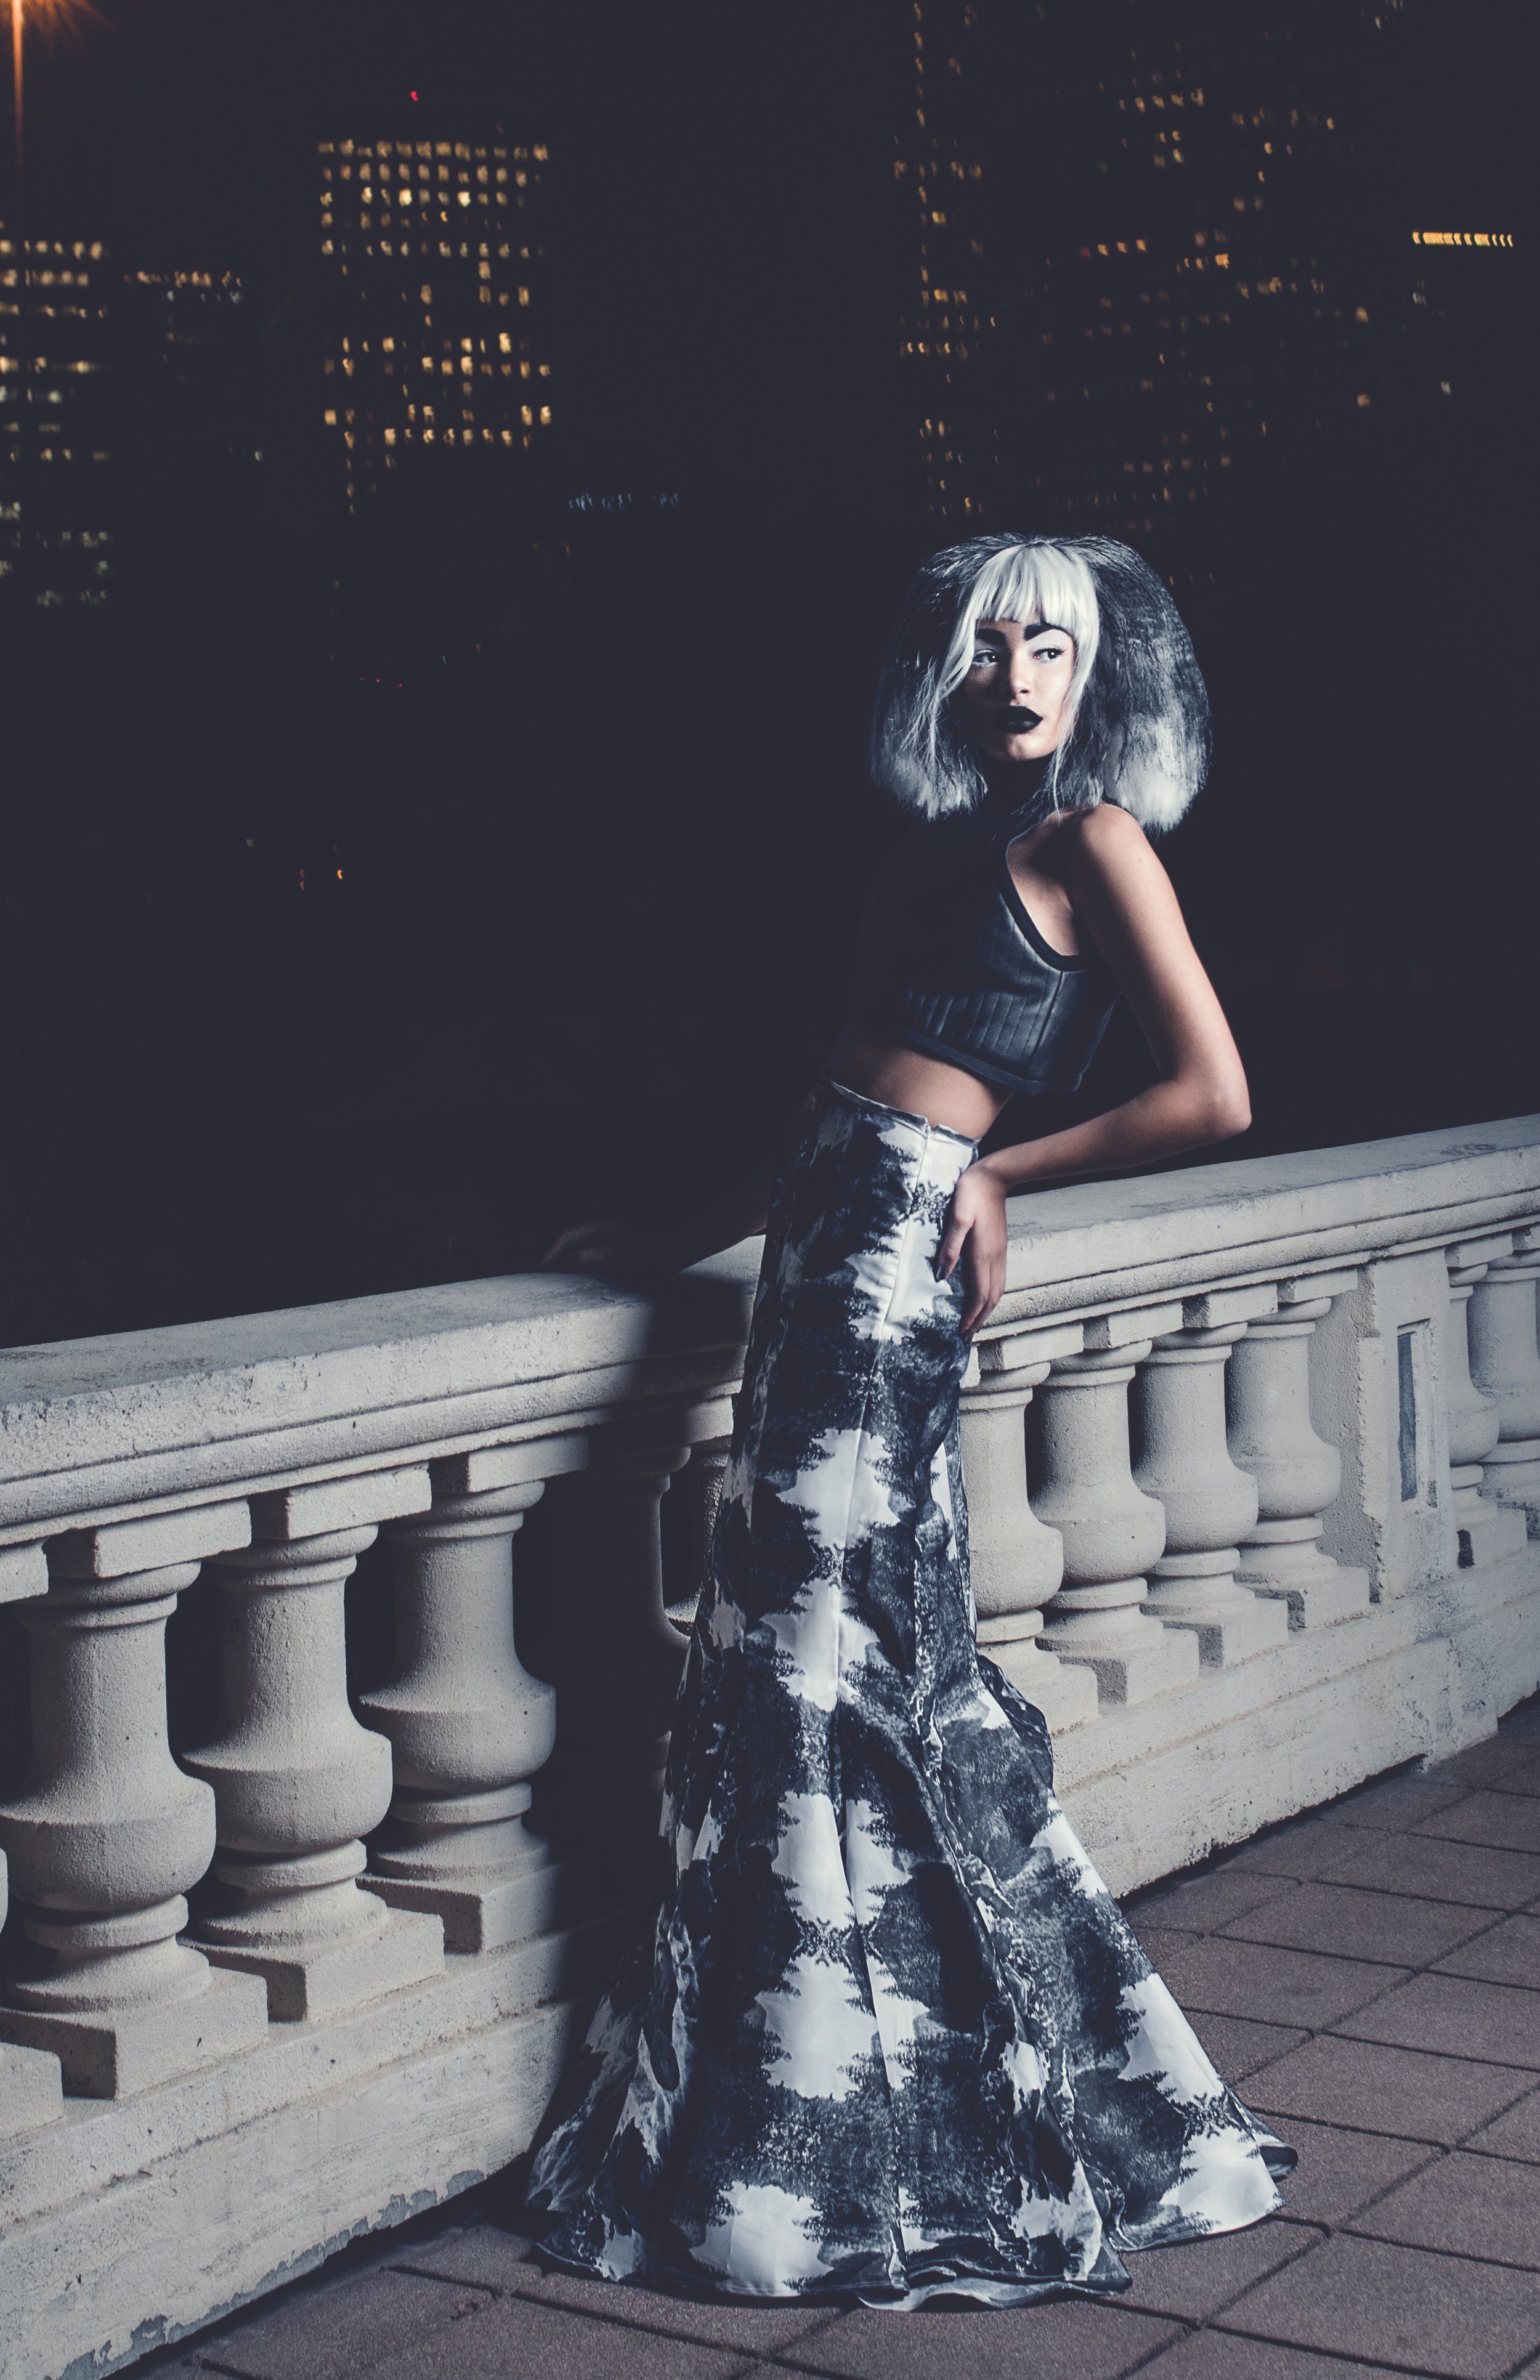  Styled Lookbook for NYFW15  Model: Marissa Hopkins, Photography: Nico Nordstrom, Makeup Artists: Morgan Horres, Wig: Michi Lafary, Designer and Stylist: Nicole Bell 